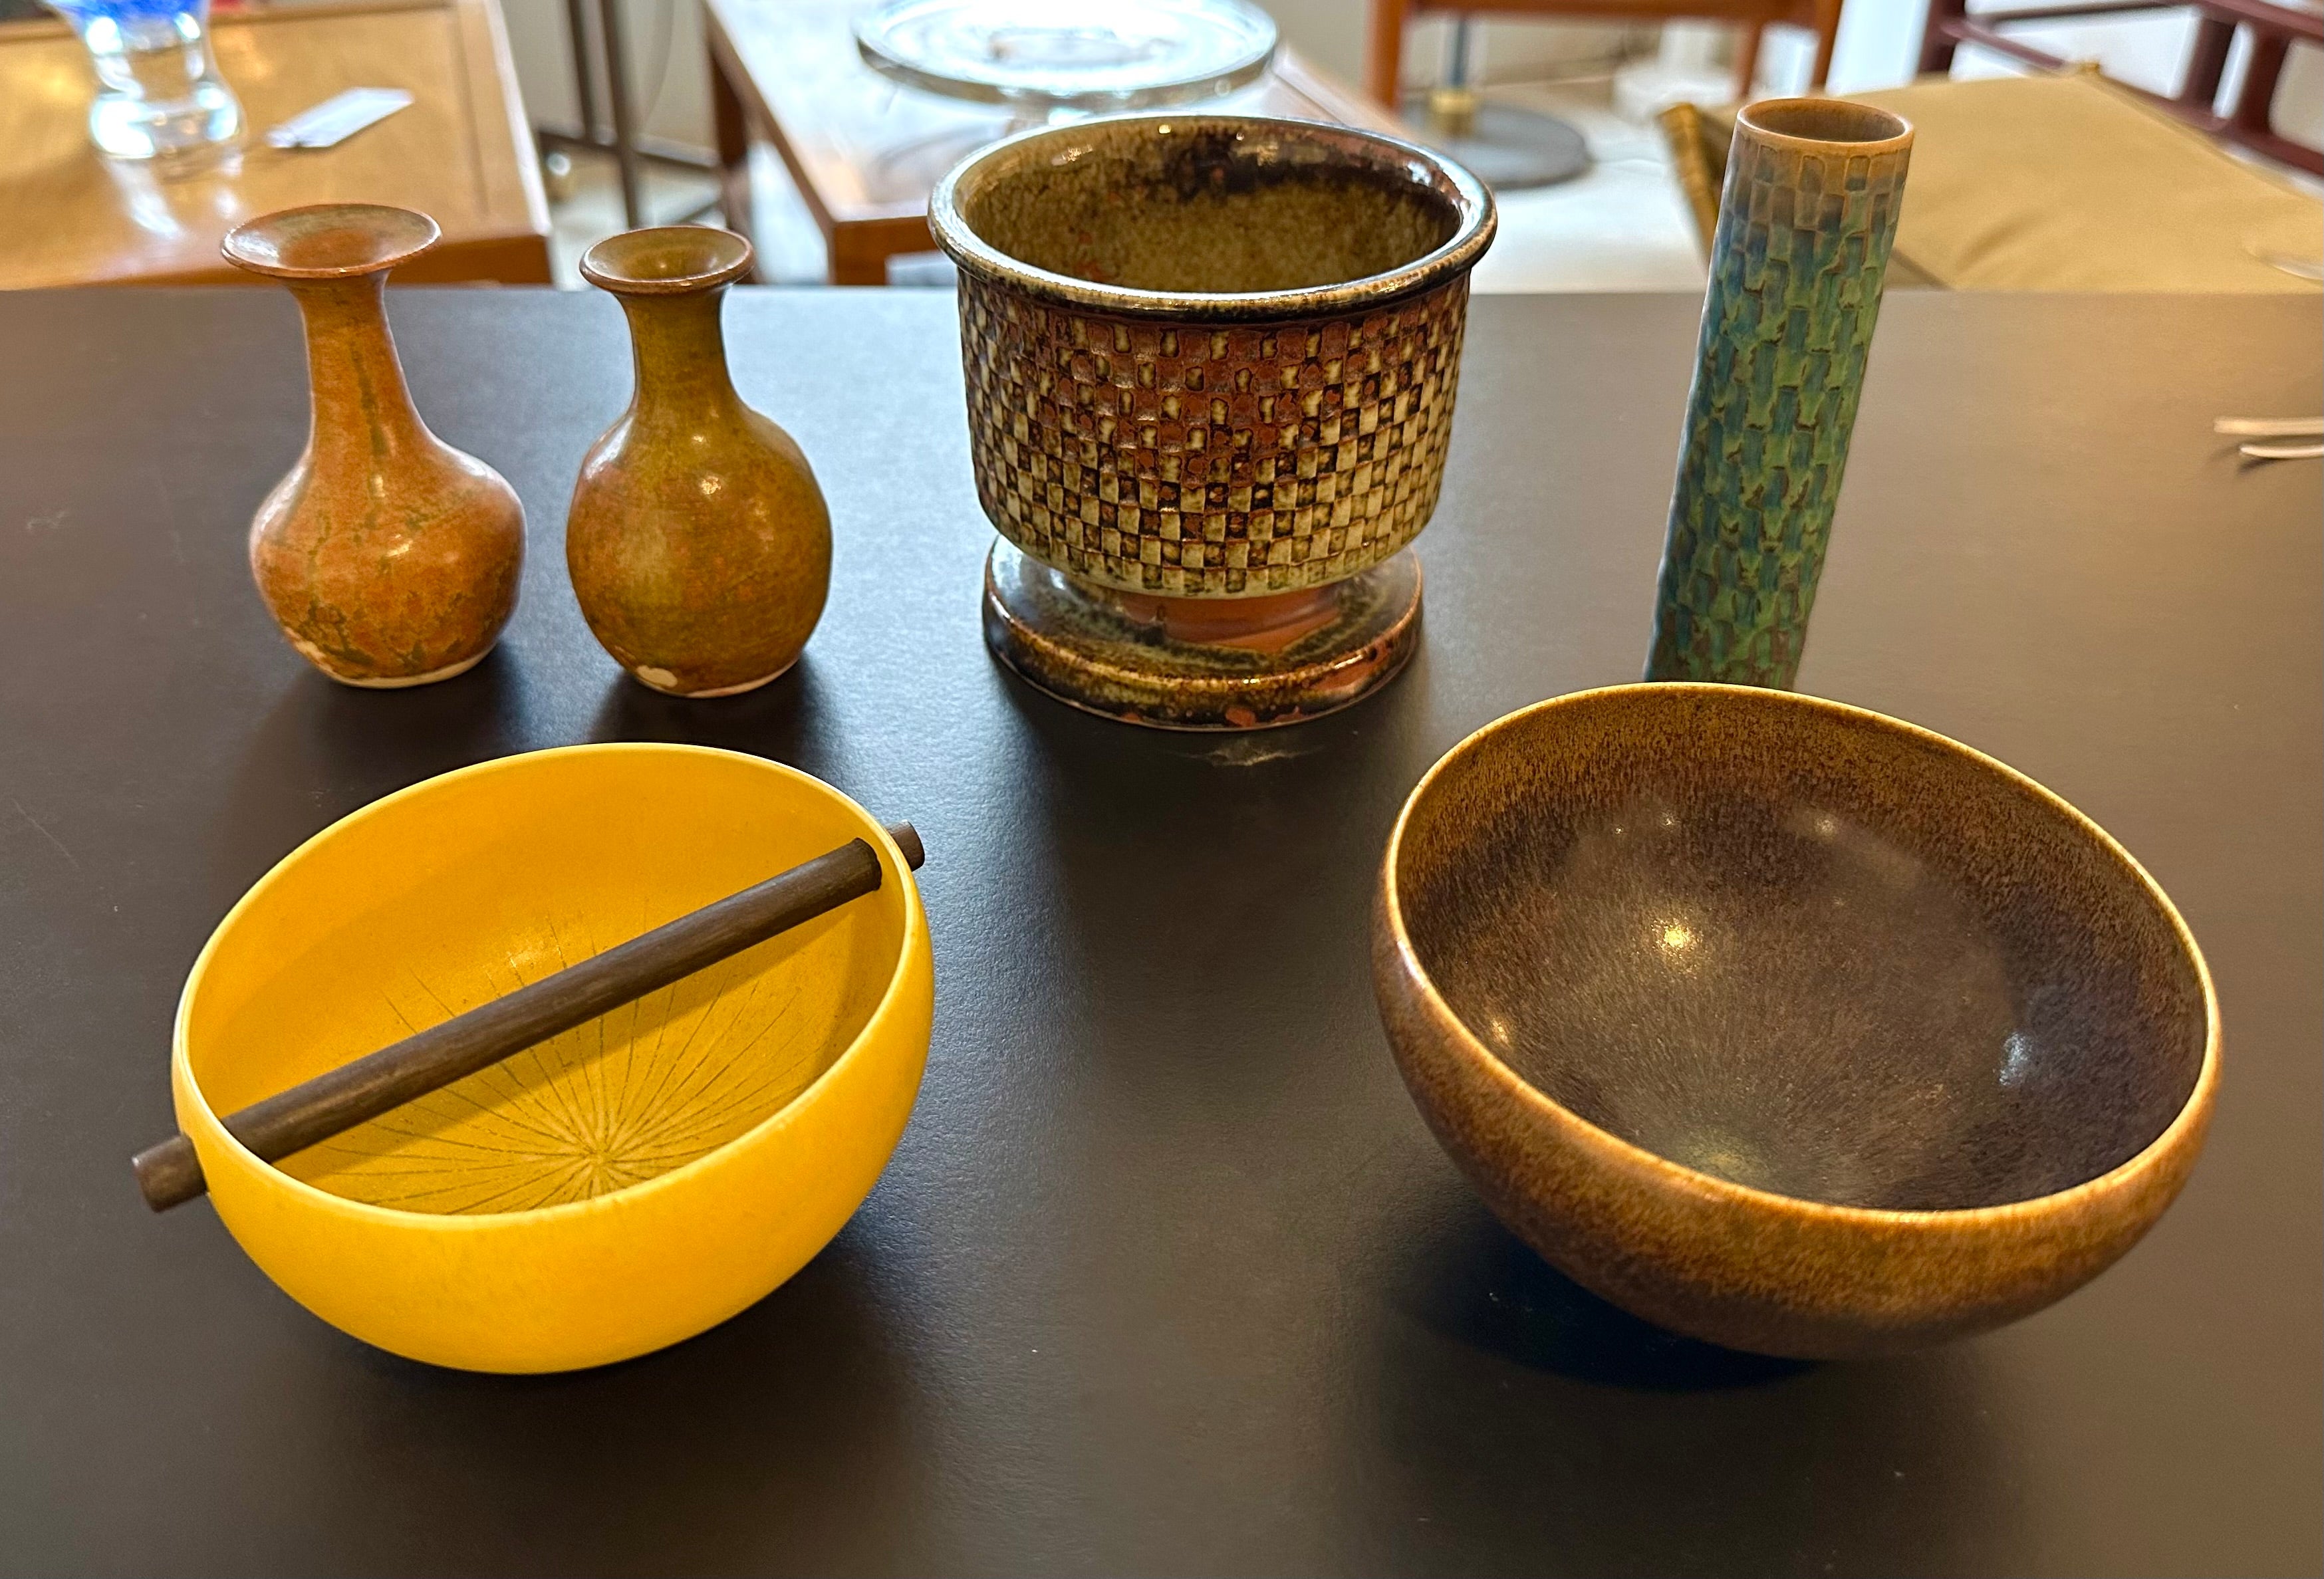 Beautiful group of unique, one-of-a-kind handmade pottery objects by master ceramists Stig Lindberg, for Gustavsberg, Sweden. 

The group includes two delicate bowls with haresfur glaze, one yellow and one brown, the yellow bowl with an interesting